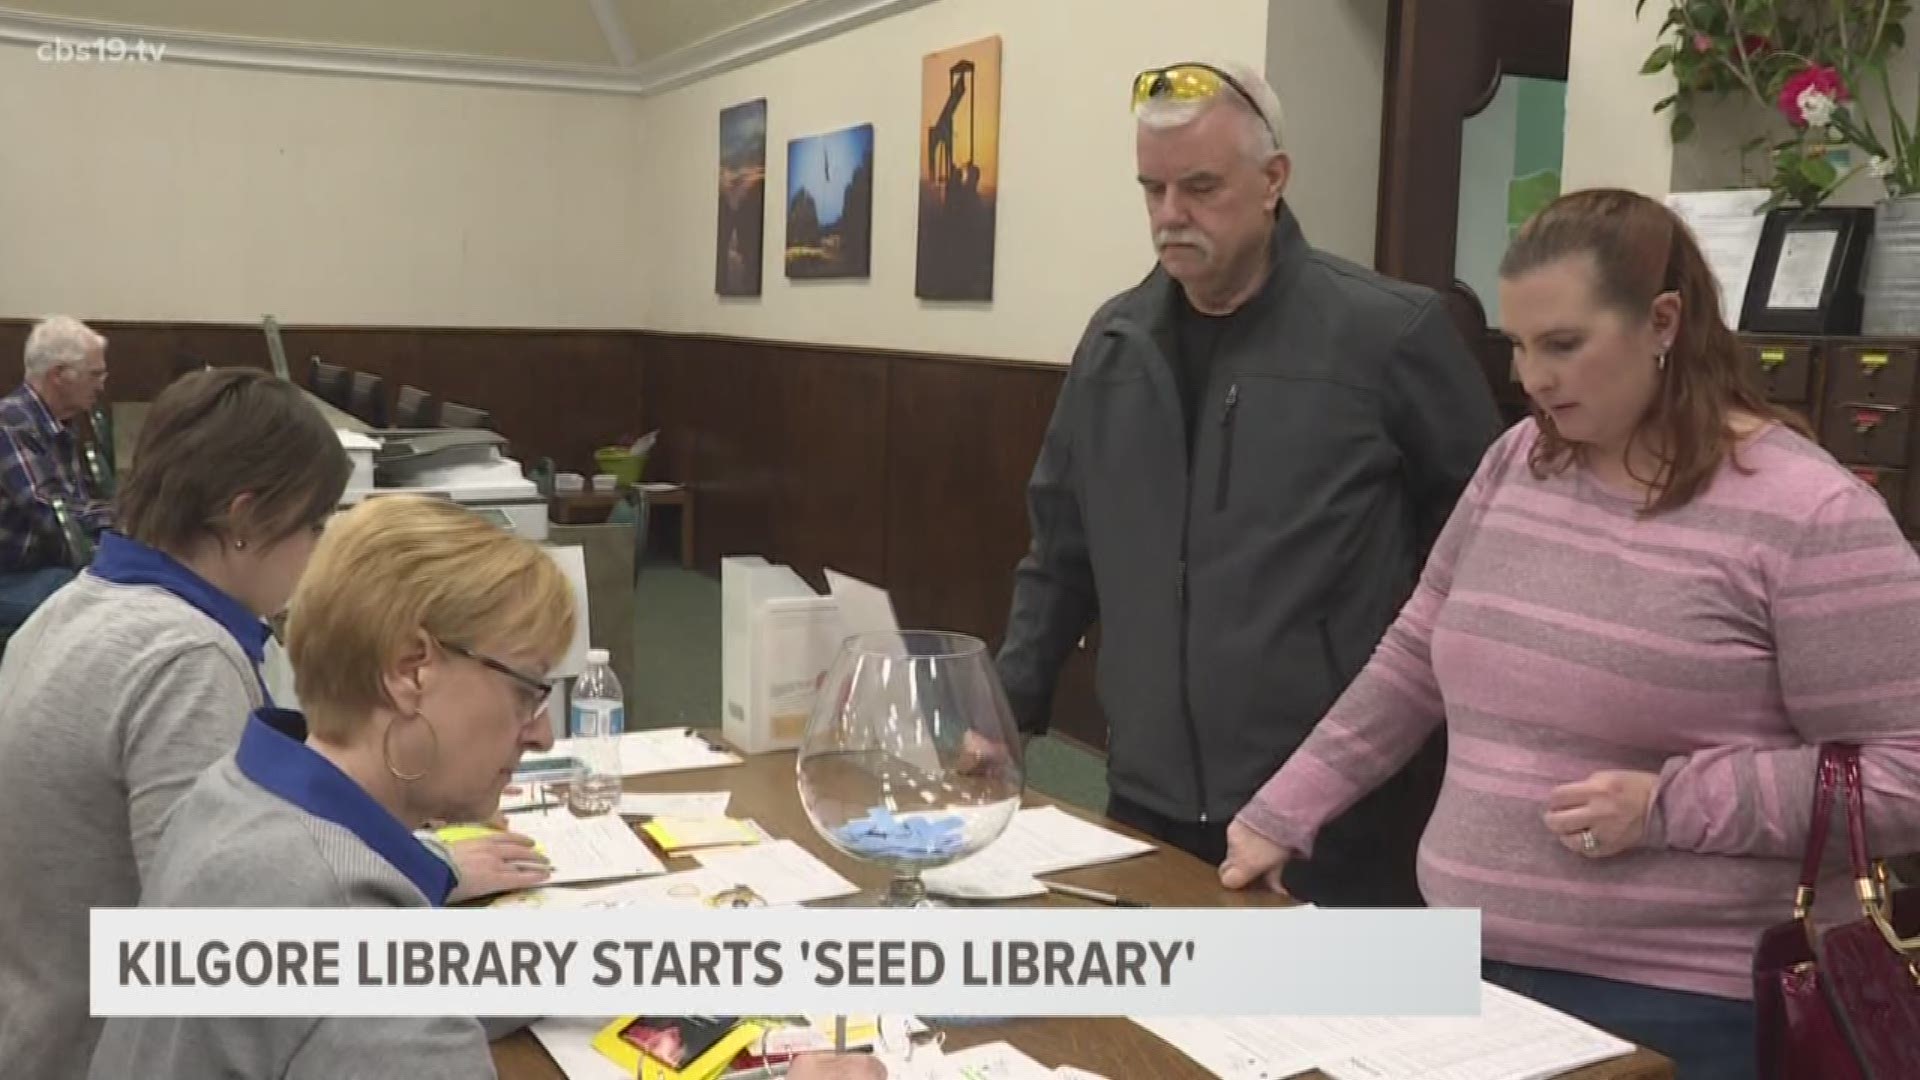 It's not quite Spring, but that's not stopping would-be gardners from checking out the Kilgore Public Library's newest program, the 'seed library.'